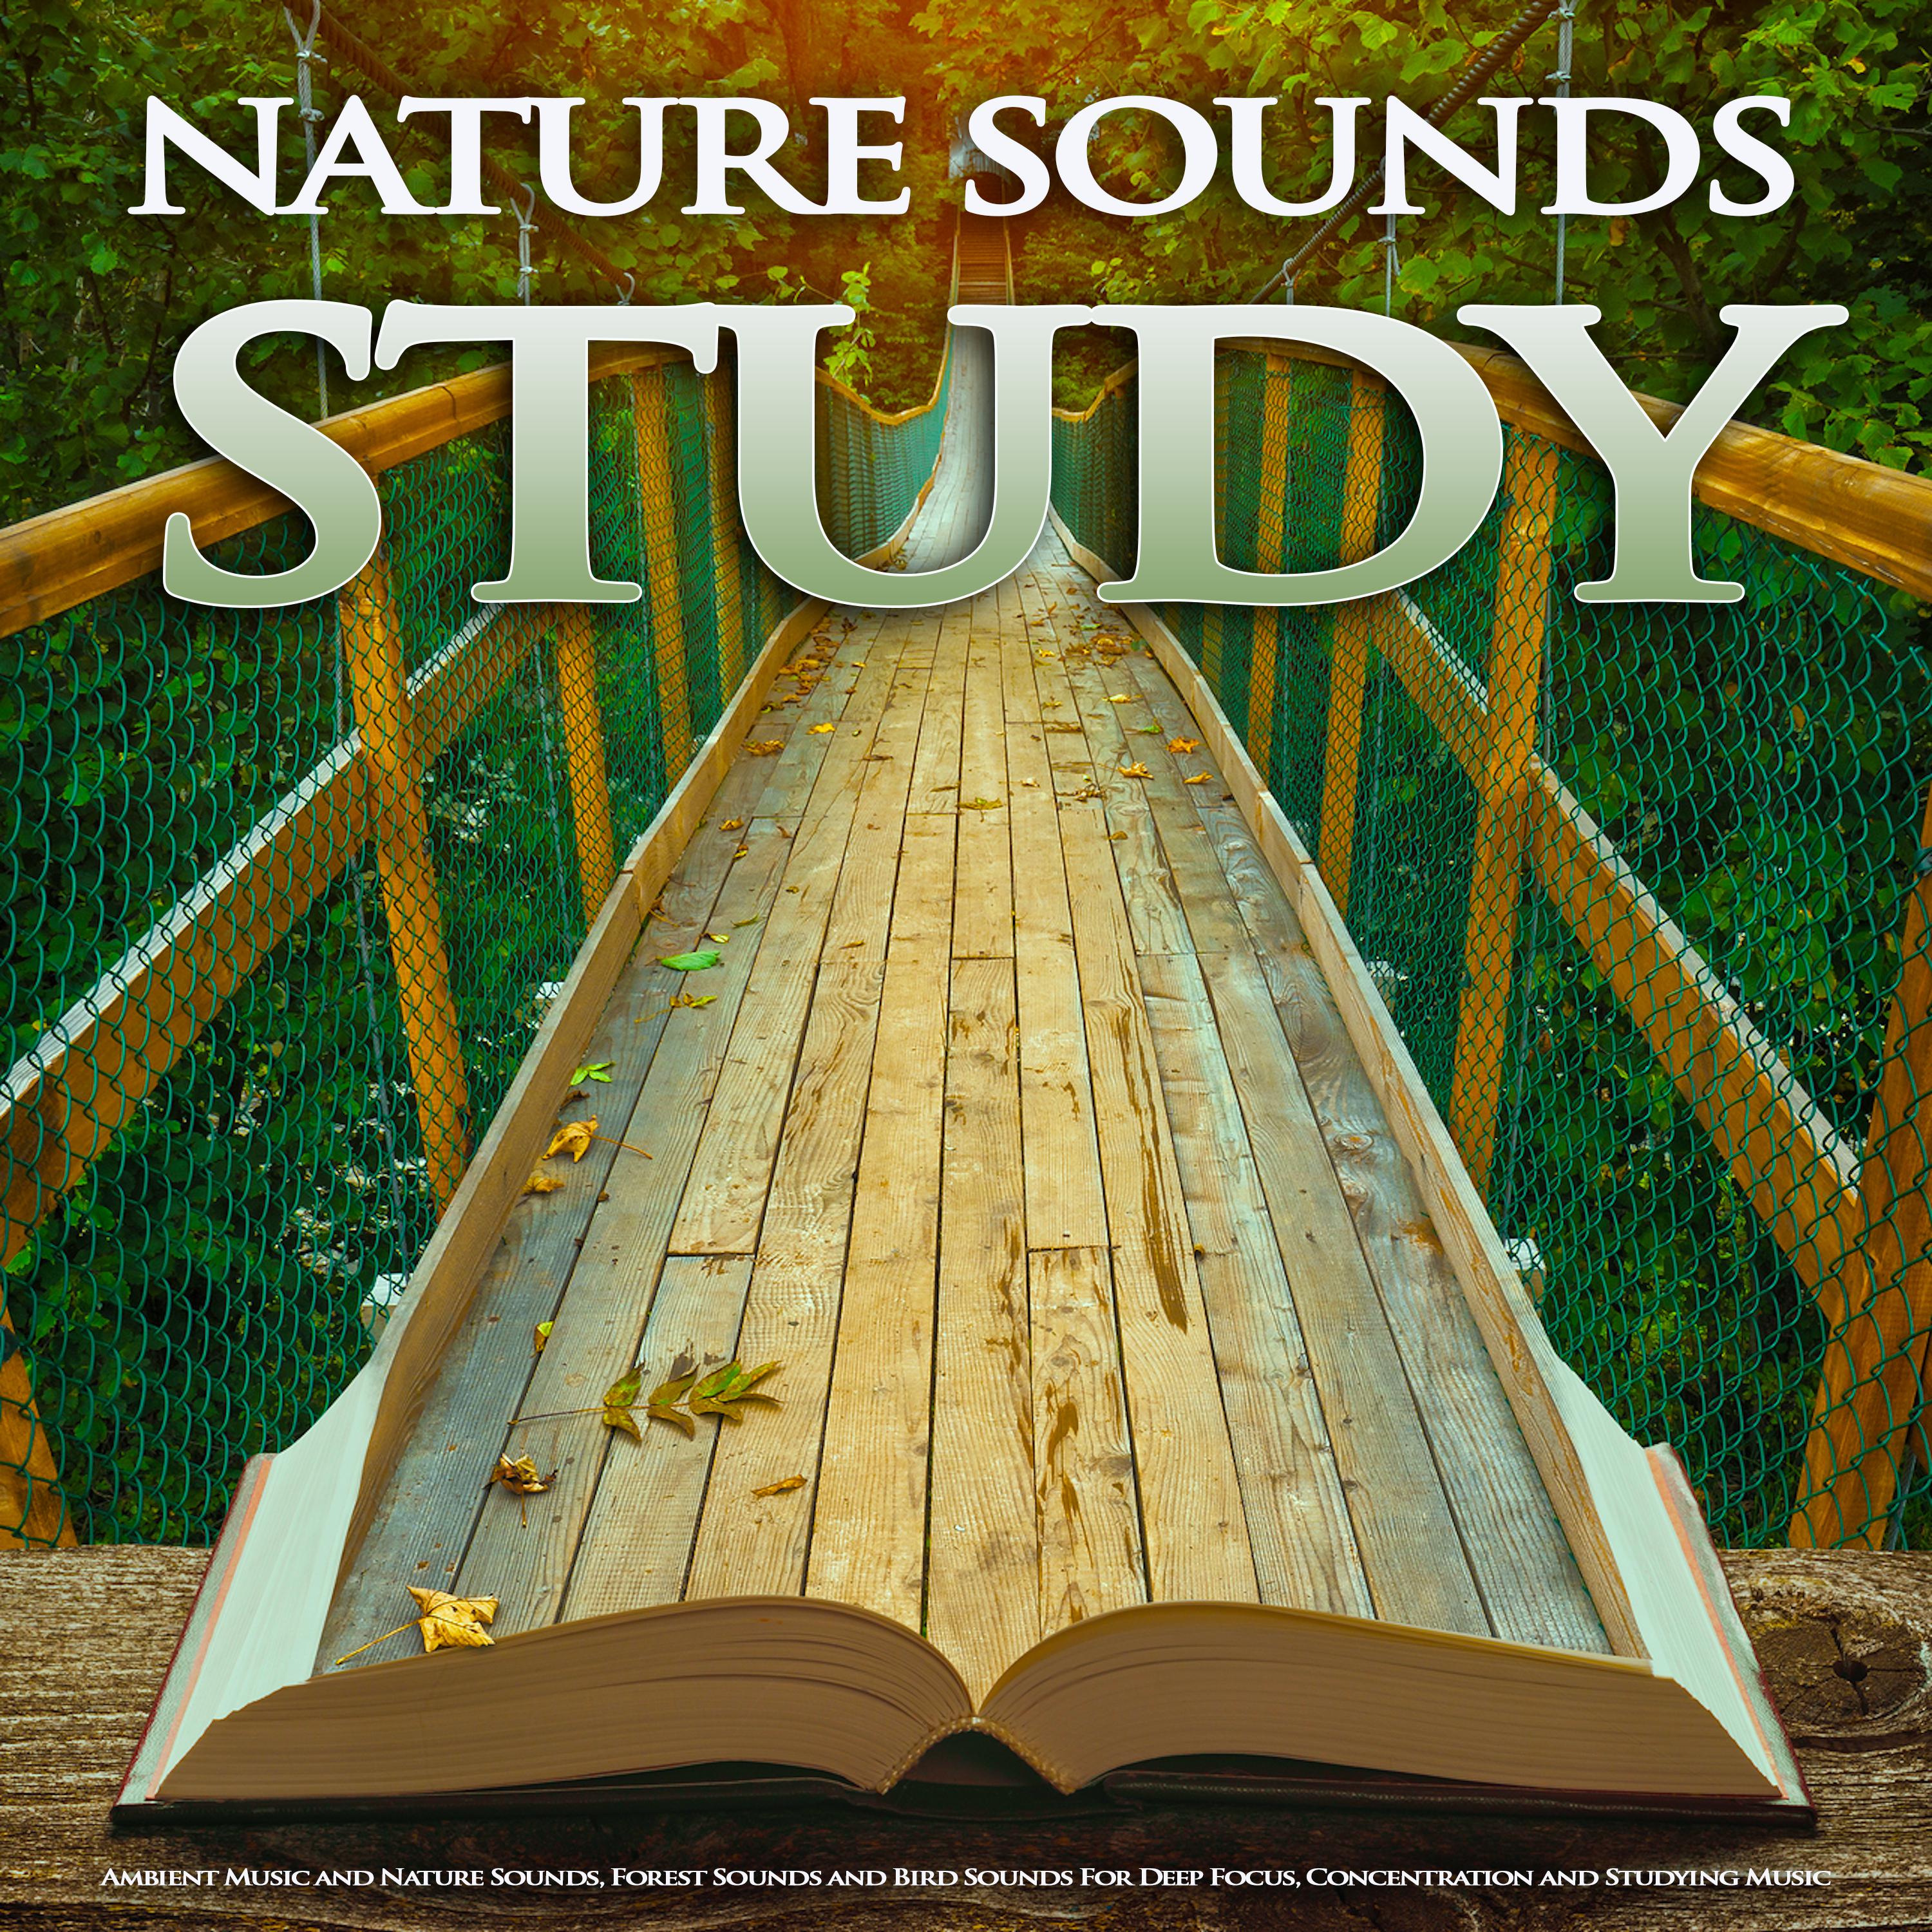 Nature Sounds Study: Ambient Music and Nature Sounds, Forest Sounds and Bird Sounds For Deep Focus, Concentration and Studying Music